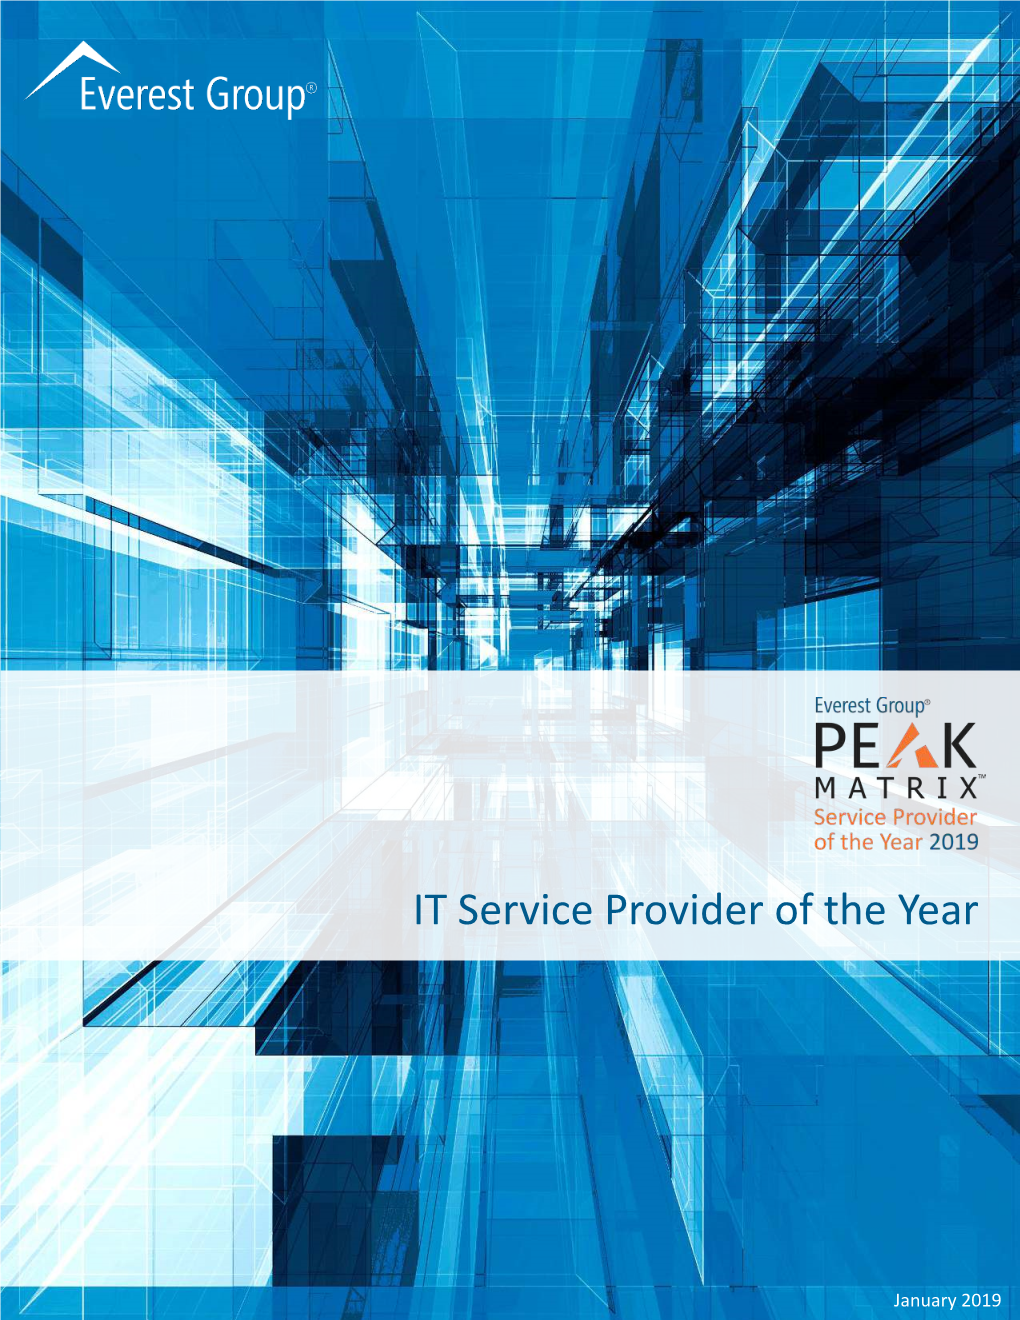 IT Service Provider of the Year Award 2019